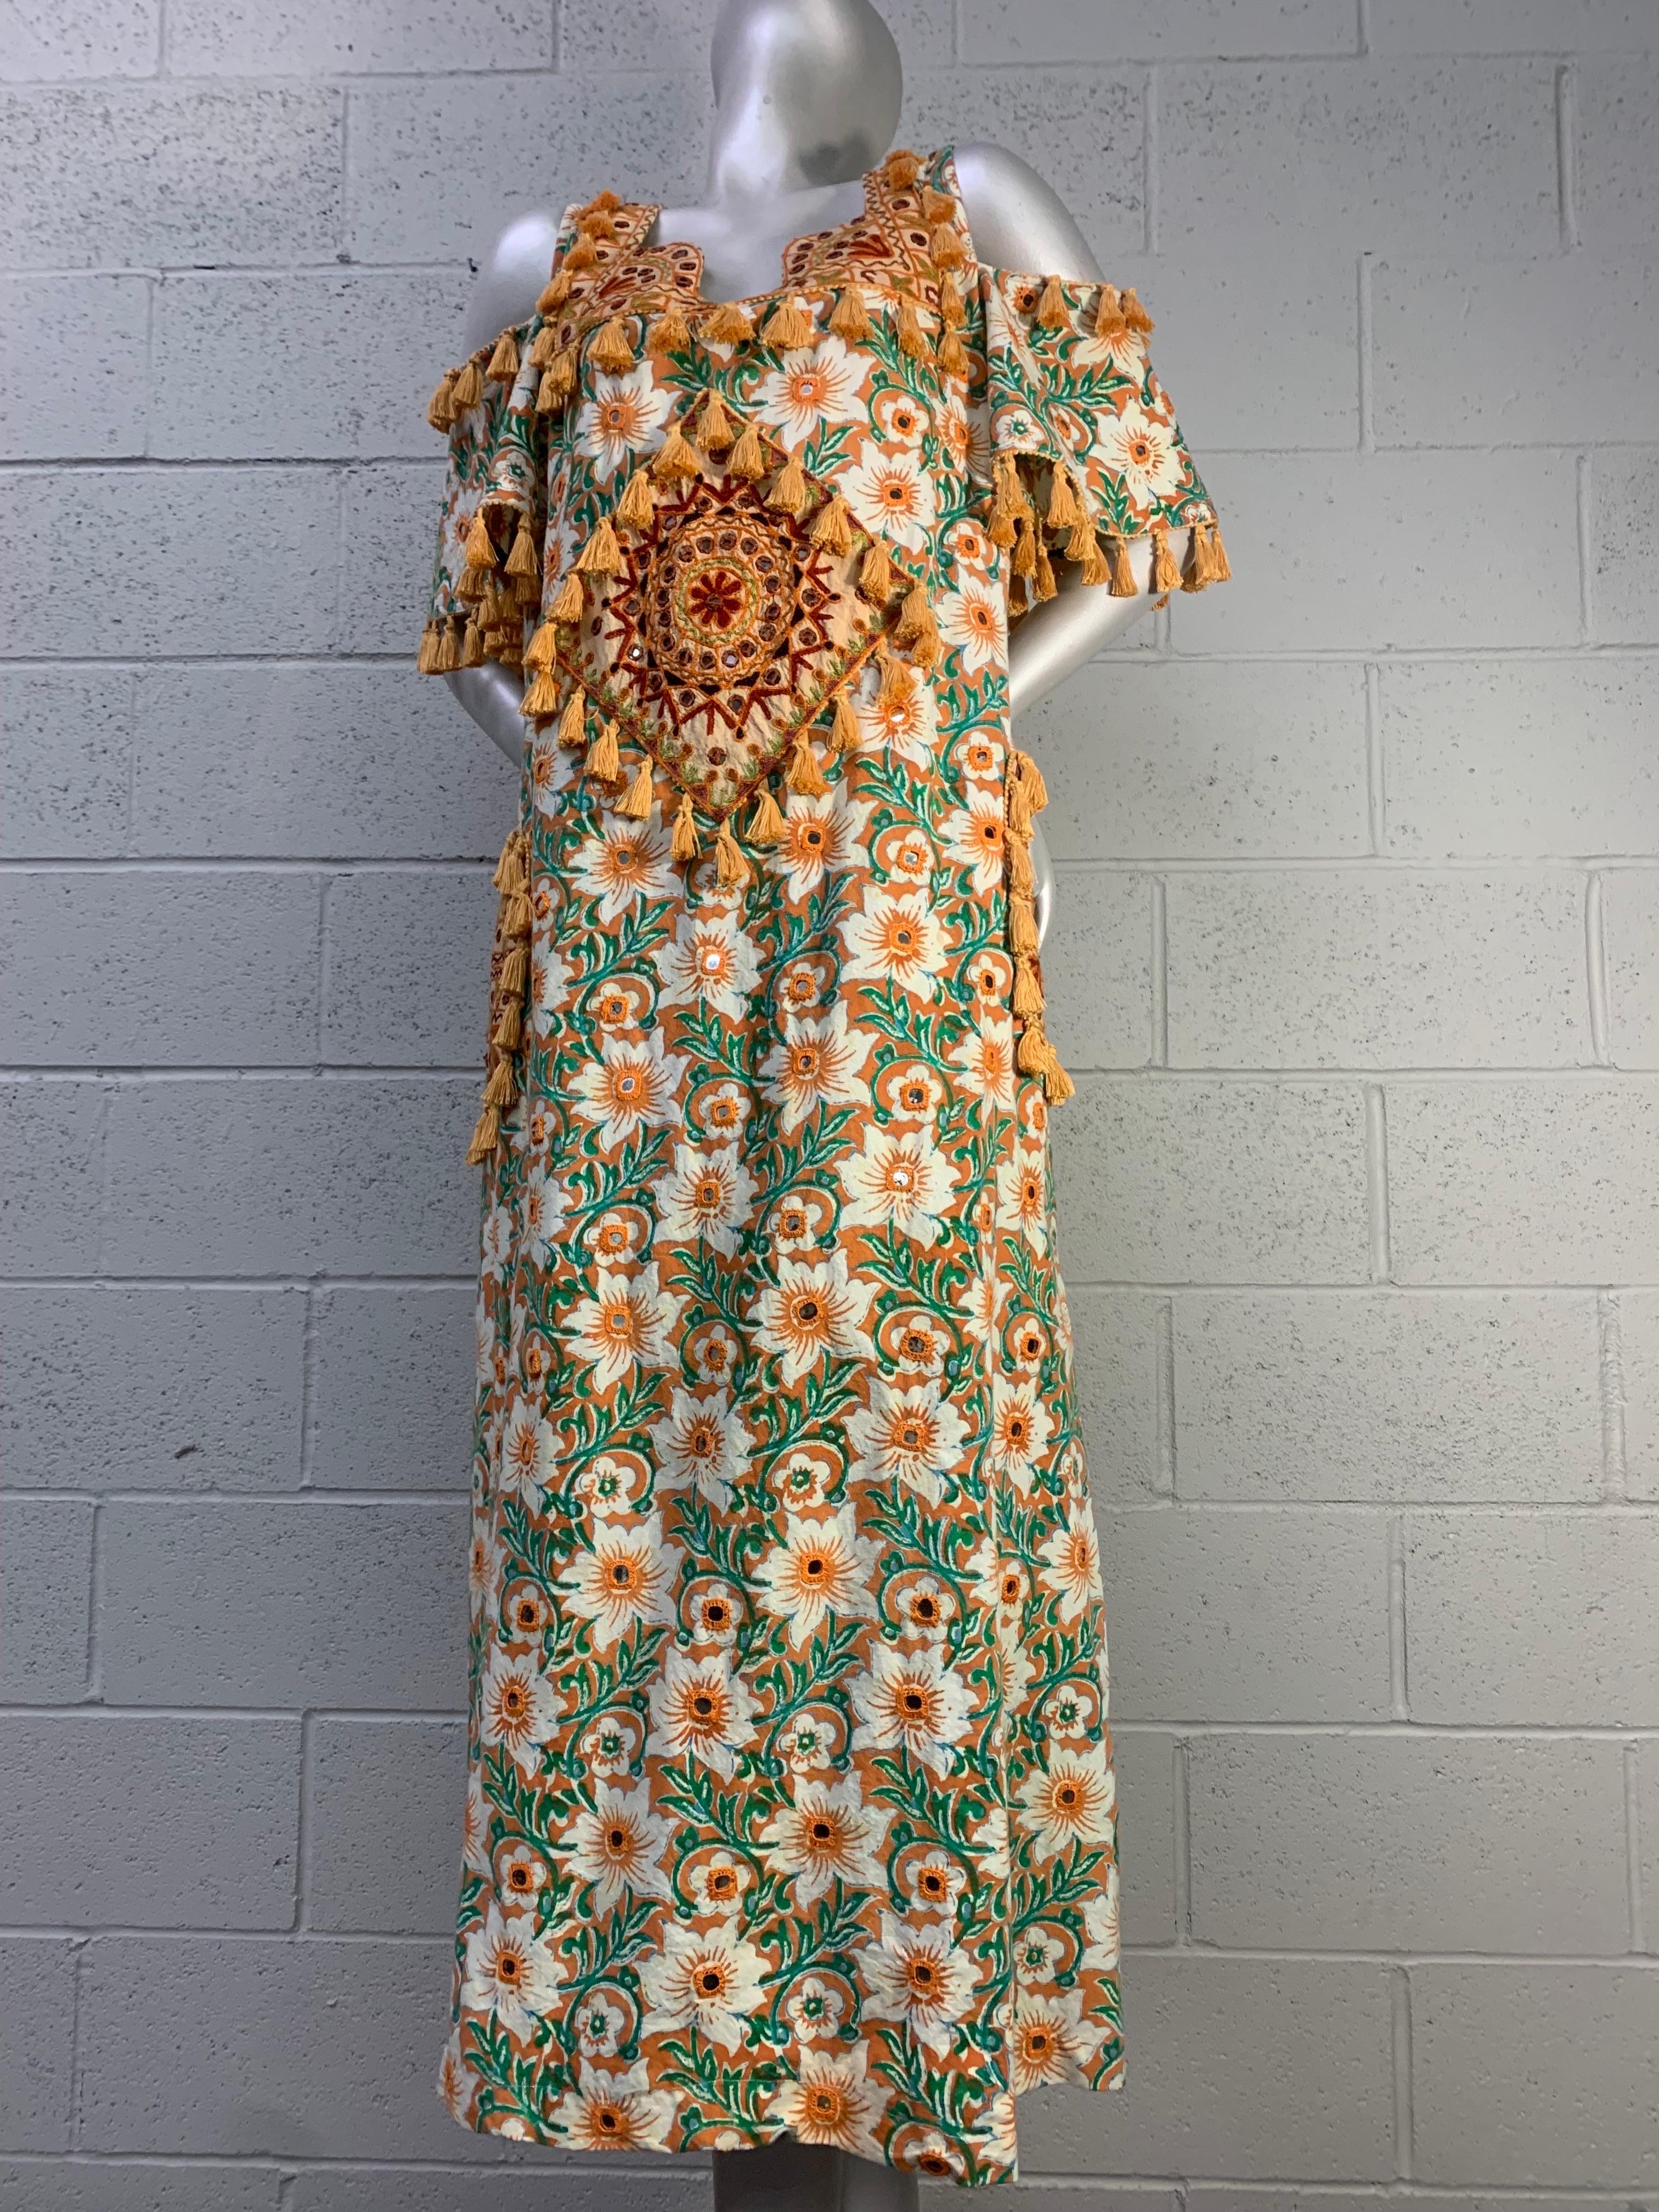 Torso Creations Cotton Lily Print Resort Dress w Mirror Tile and Tassel Fringe: Bare, drop-shoulder sleeves in an A-line silhouette. An original 1970s Ramona Rull dress in white, saffron and sage green stylized florals has been artfully married with